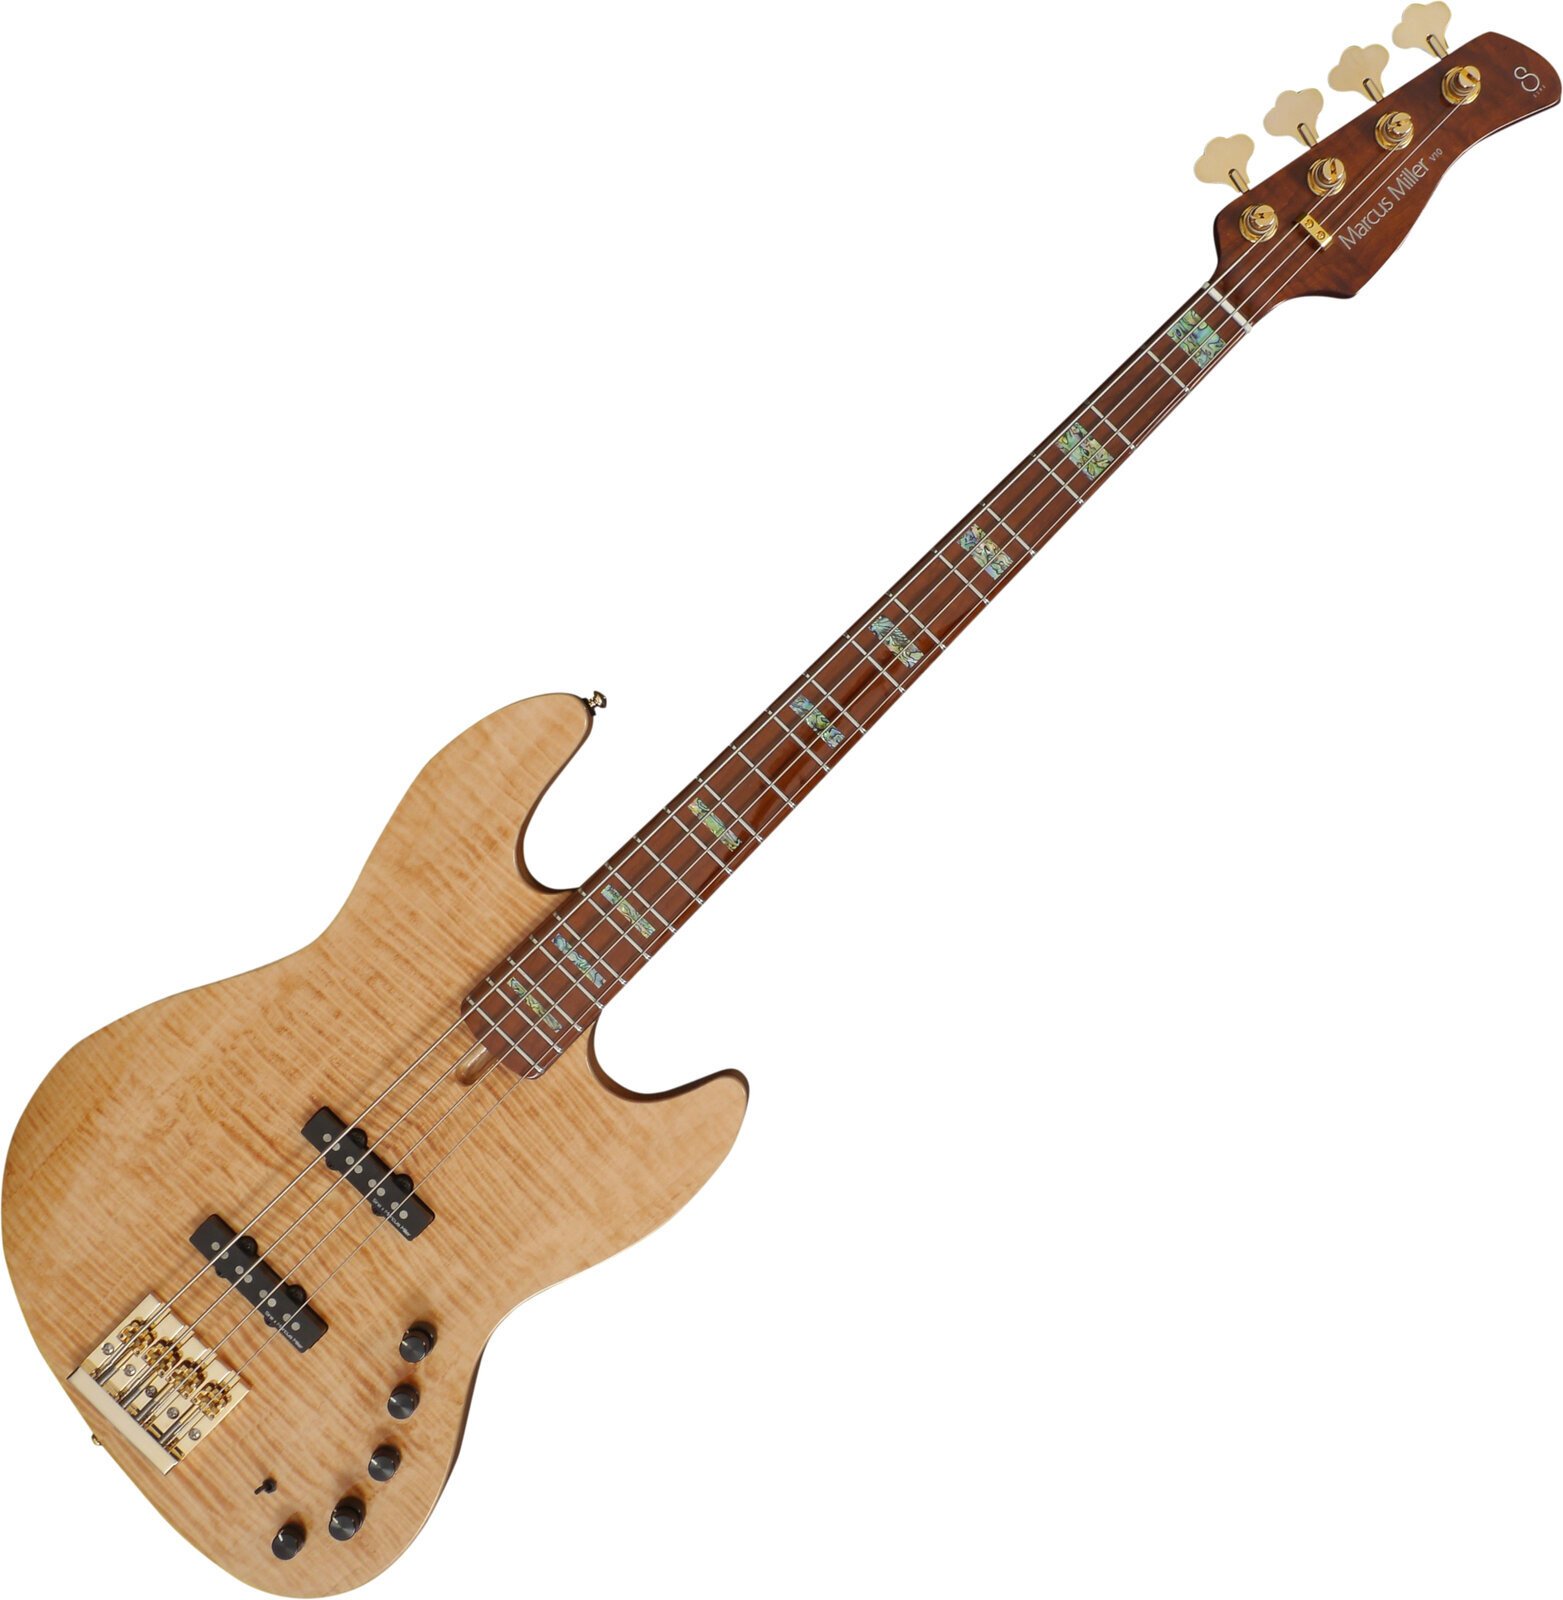 E-Bass Sire Marcus Miller V10 DX-4 Natural